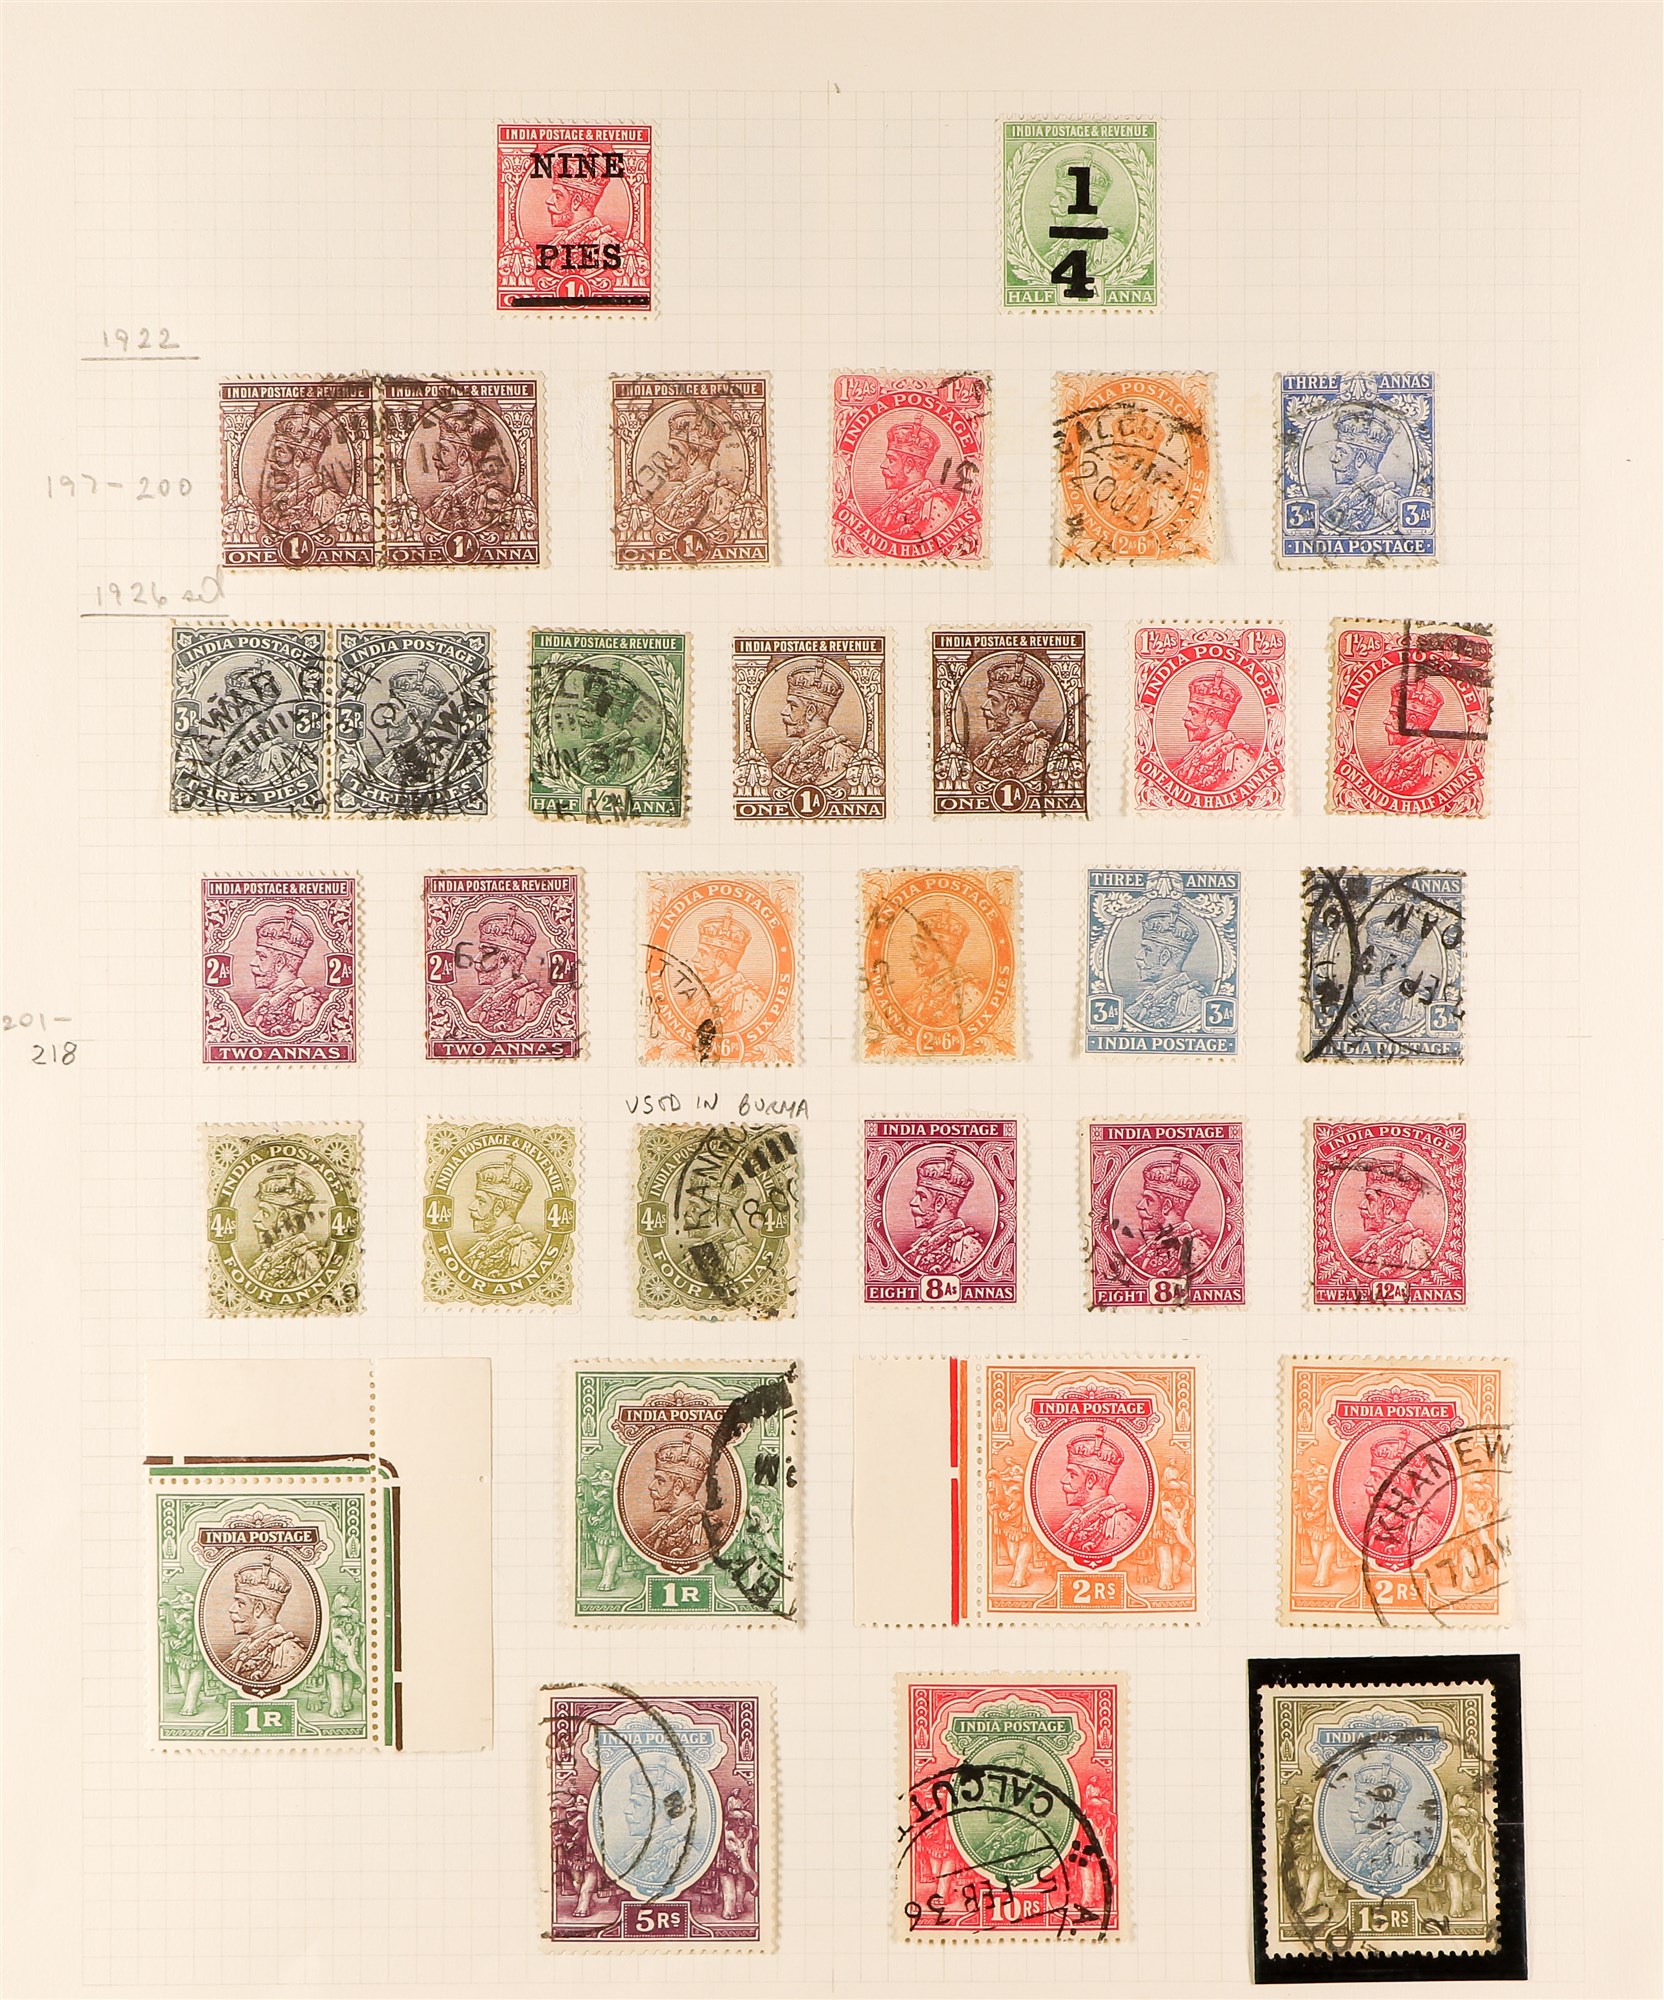 INDIA 1902 - 1943 OLD COLLECTION of 230+ mint & used stamps on 6 album pages. - Image 3 of 6